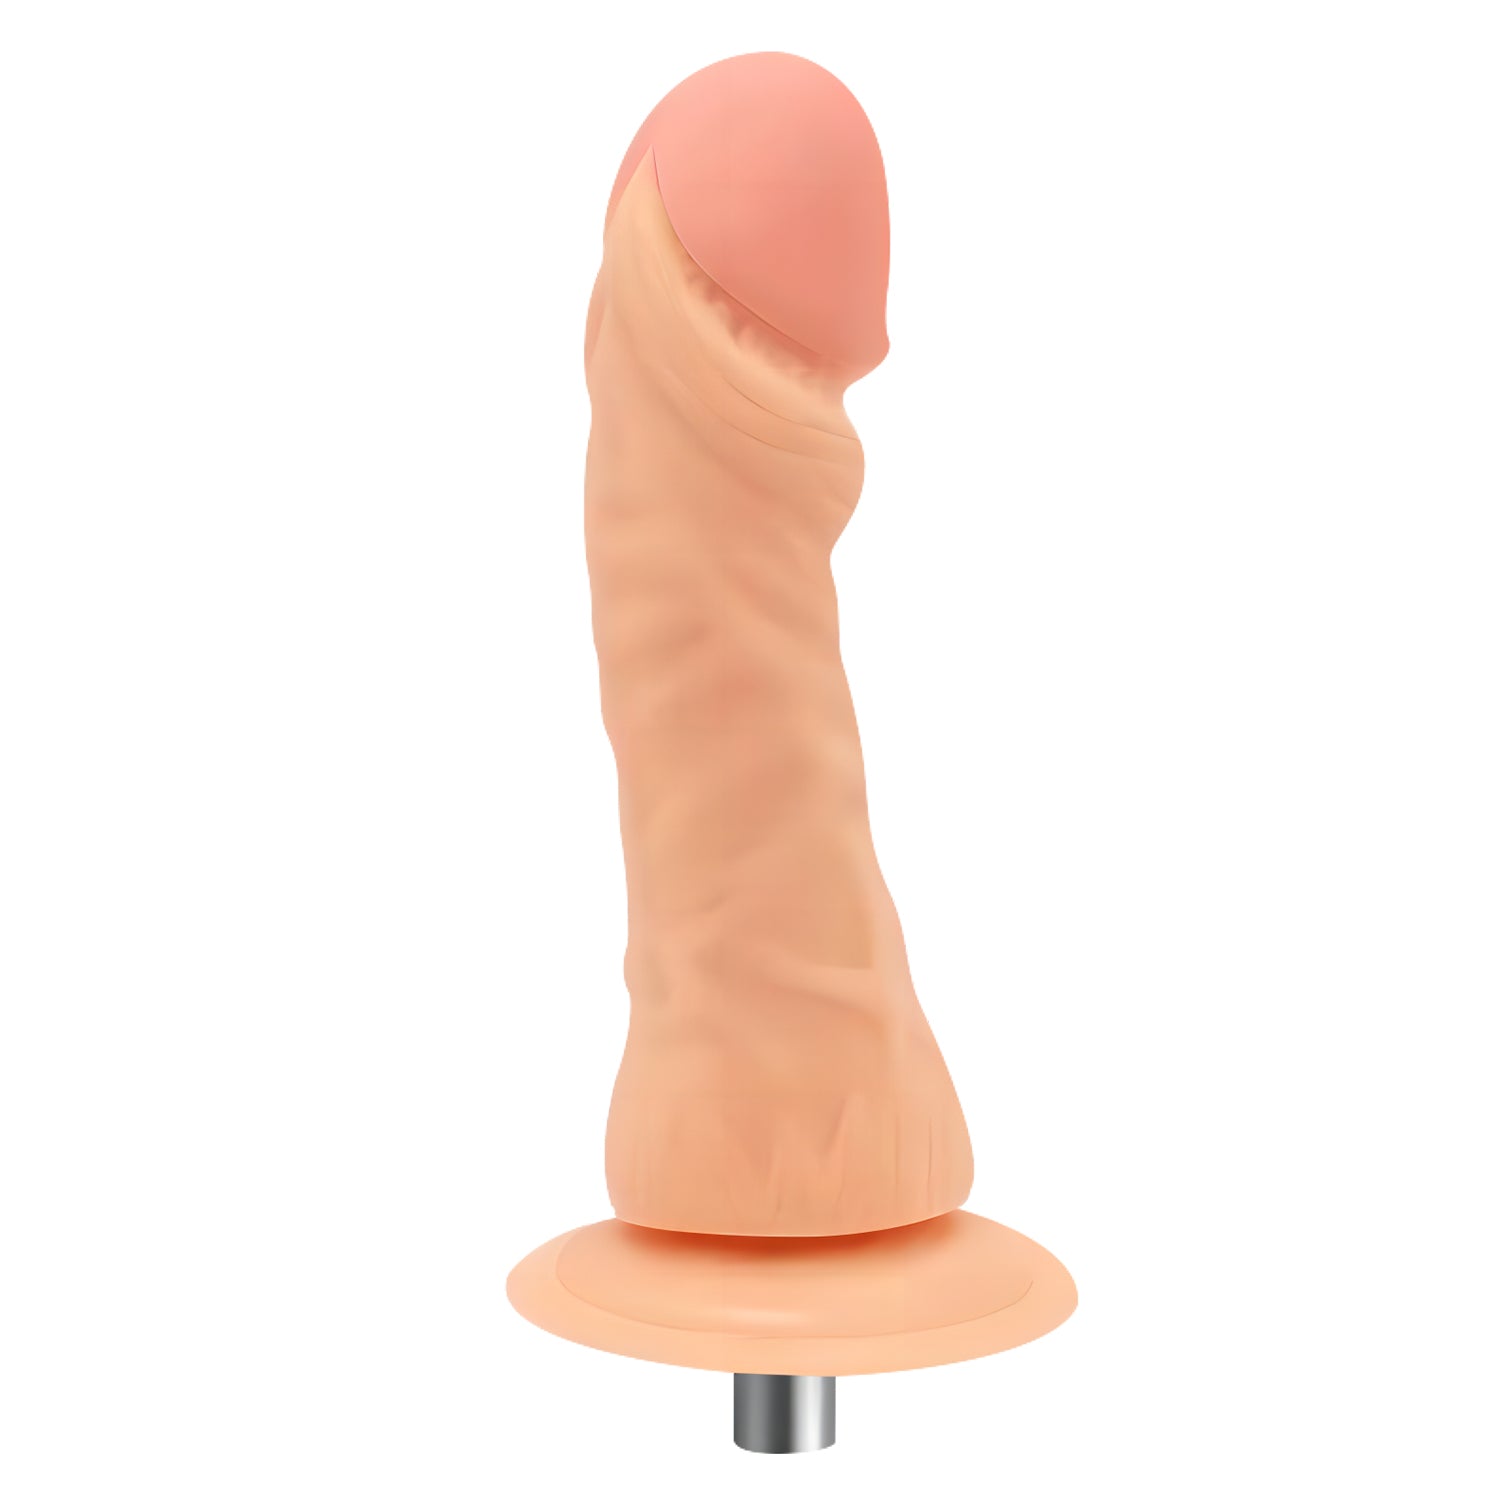 6.1 Inch Dildo Accessories with Big Glans